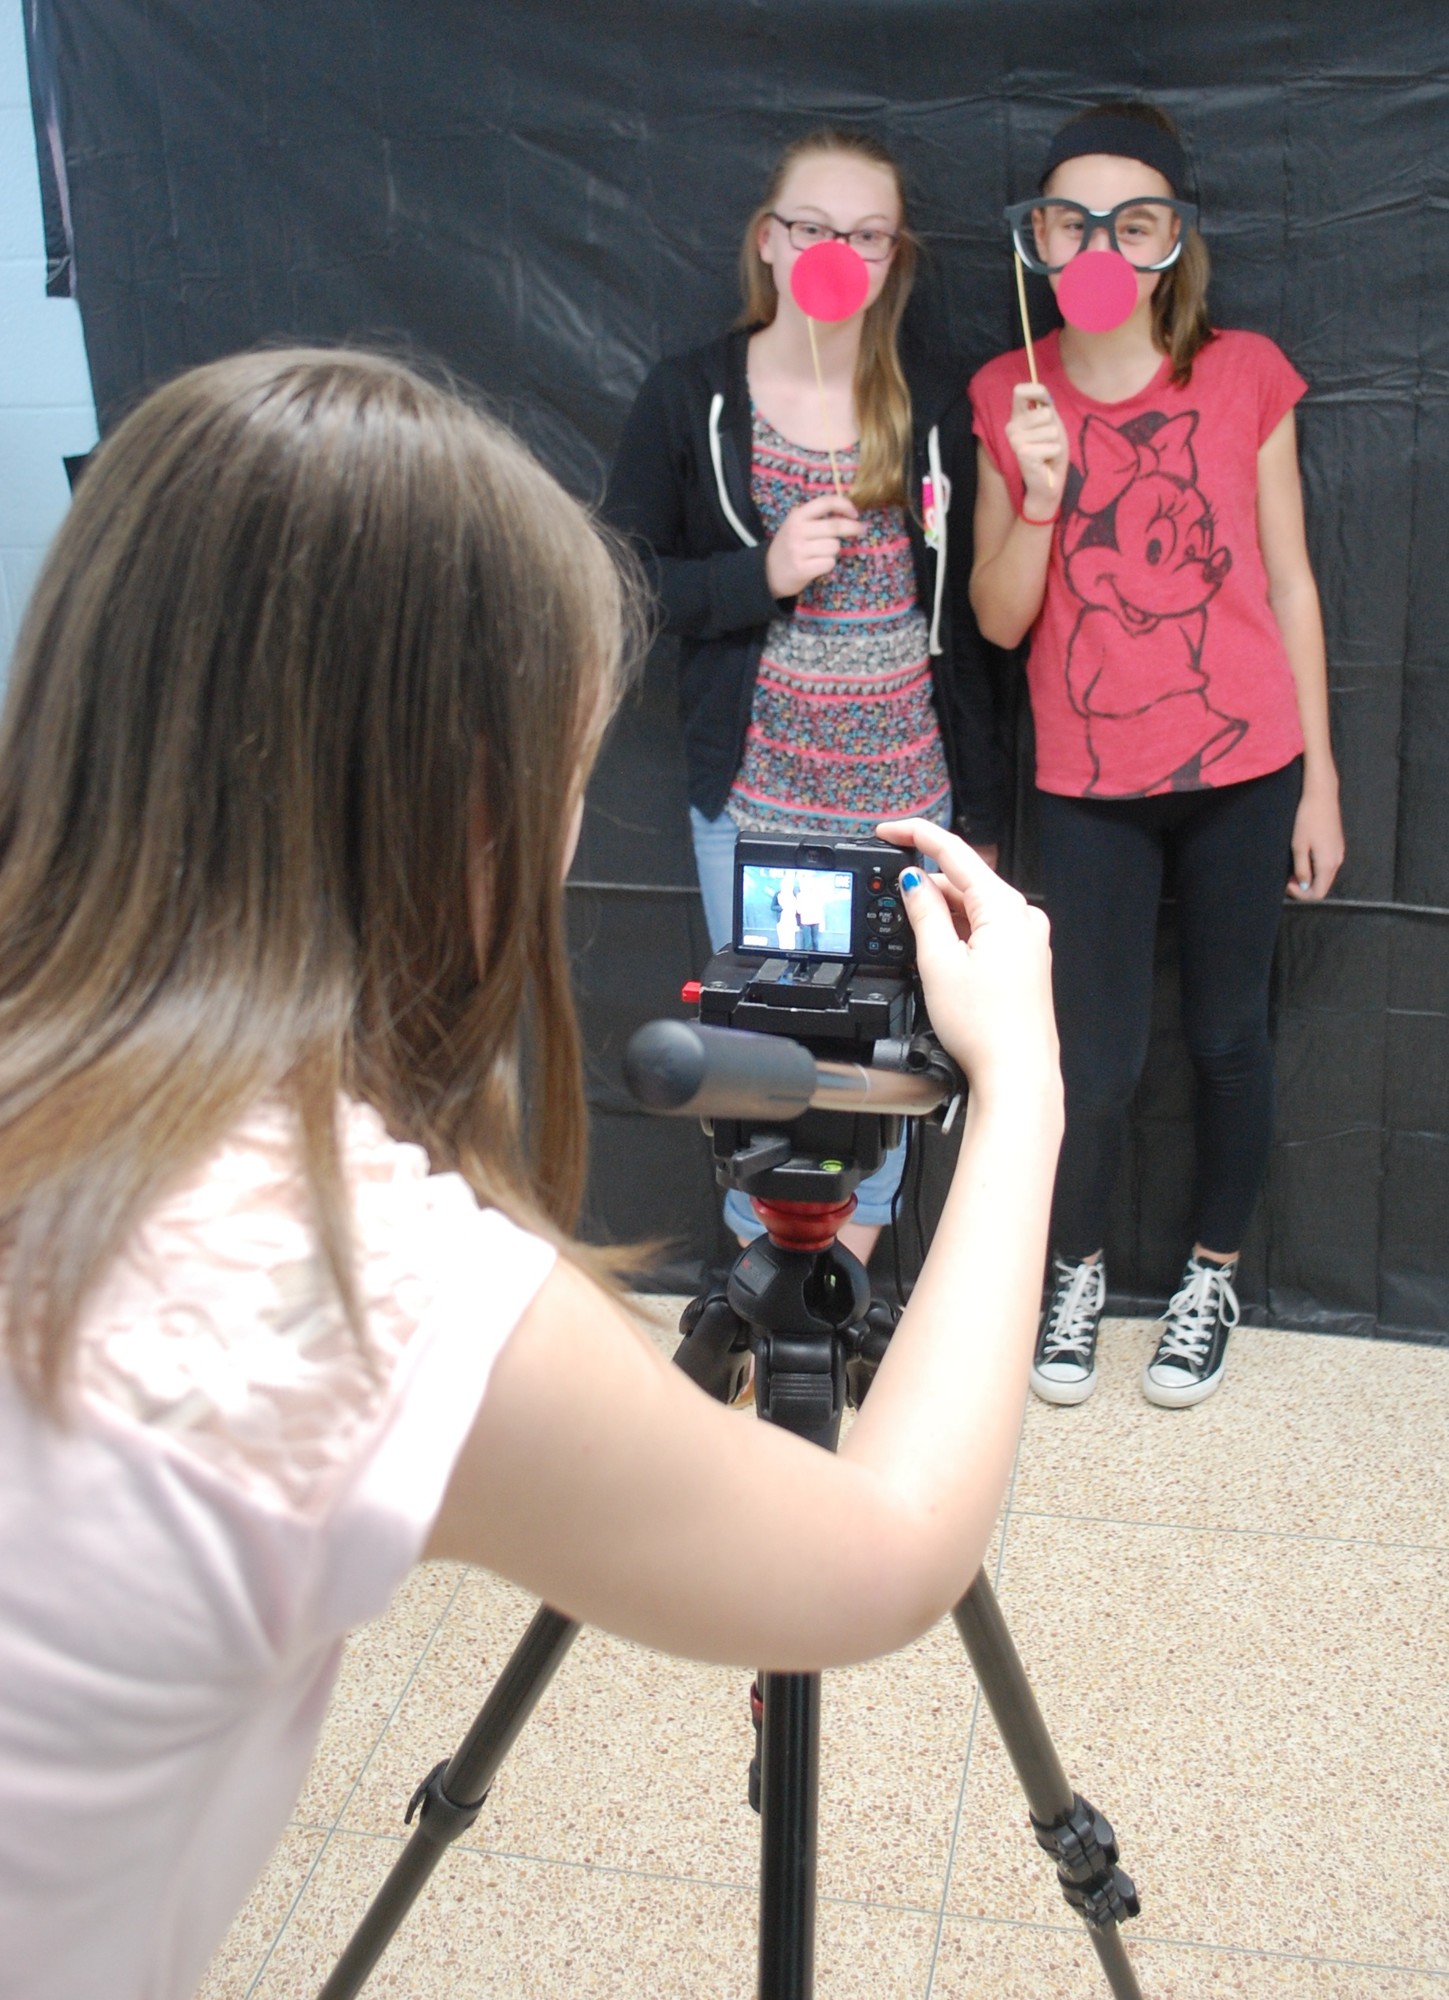 Student Council members Kaitlin Steingruebner, left, and Laura Keltan had their photo taken for the slideshow.